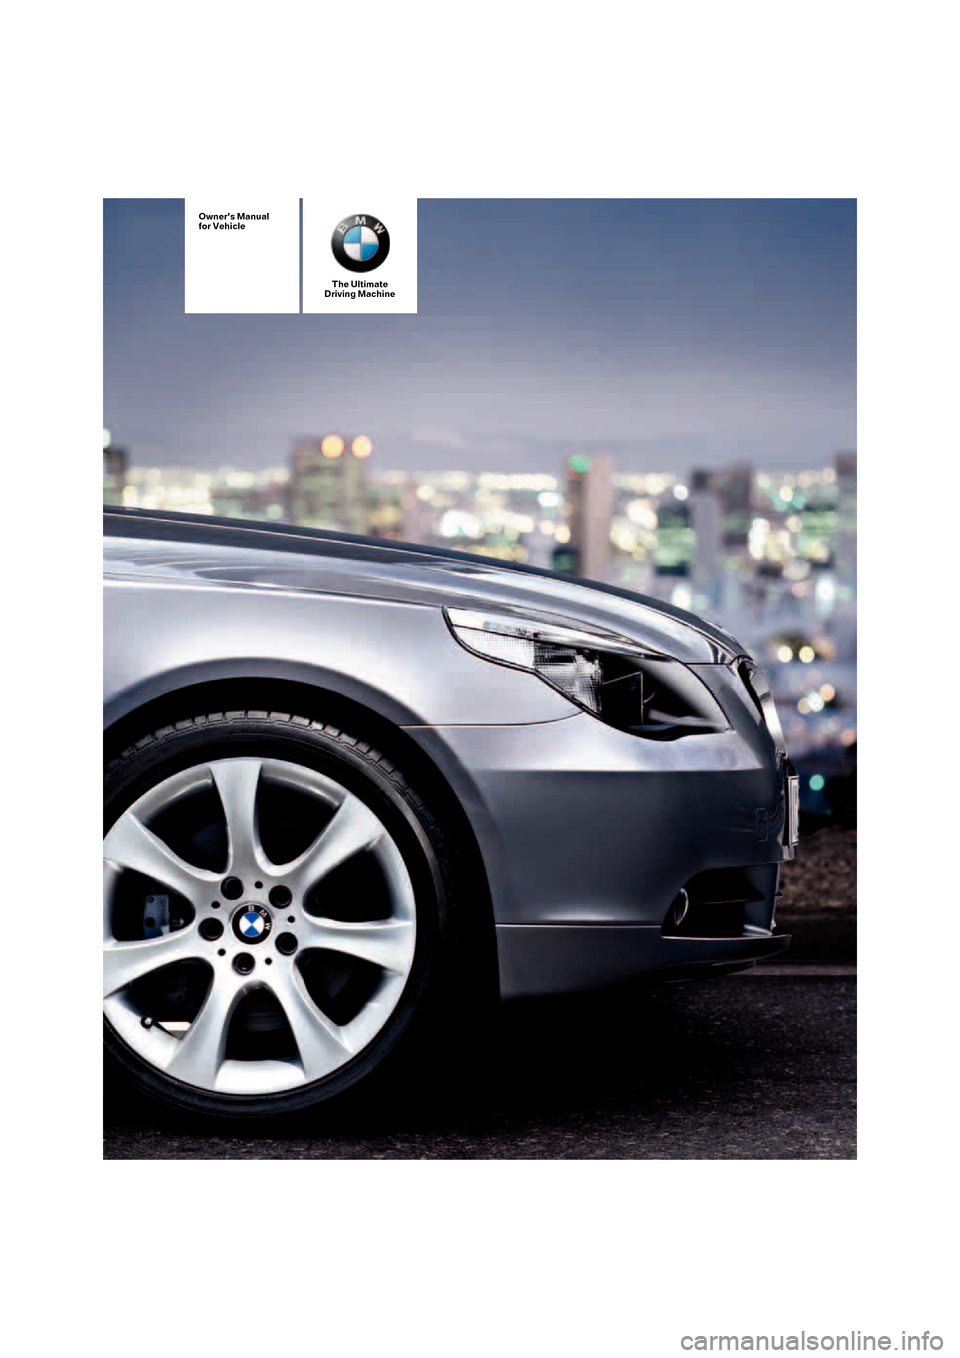 BMW 525XI TOURING 2006 E61 Owners Manual The Ultimate
Driving Machine
Owners Manual
for Vehicle 